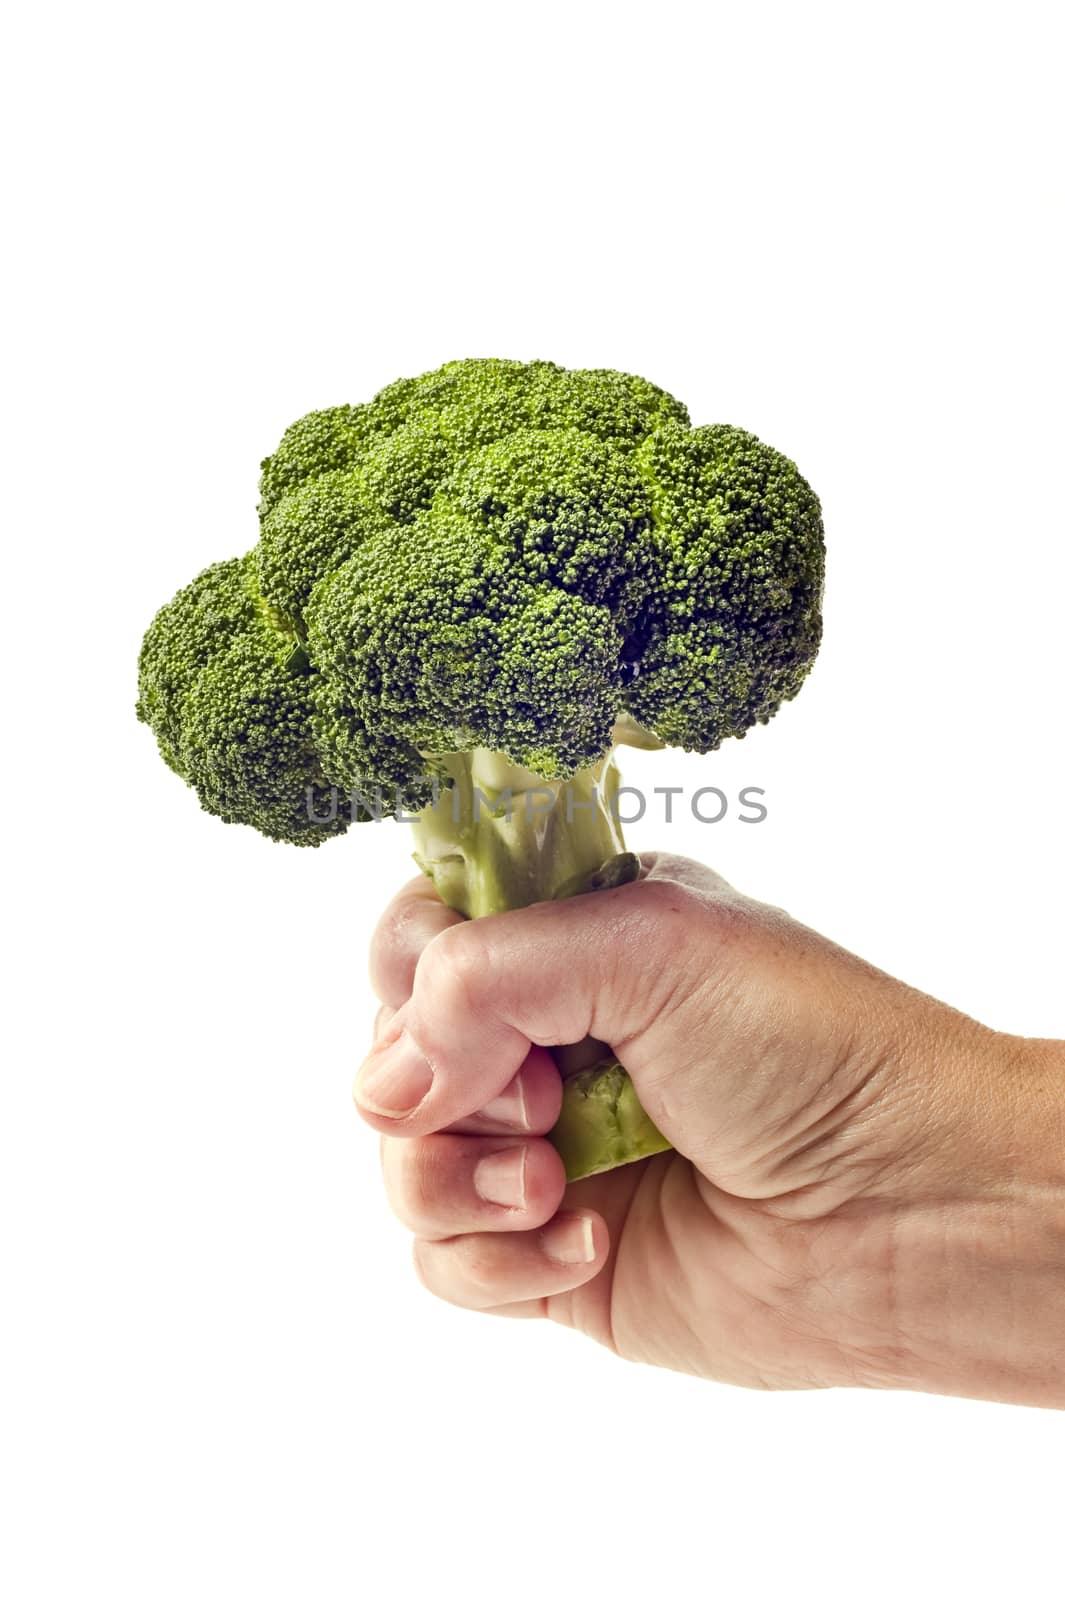 Handful Of Broccoli by stockbuster1